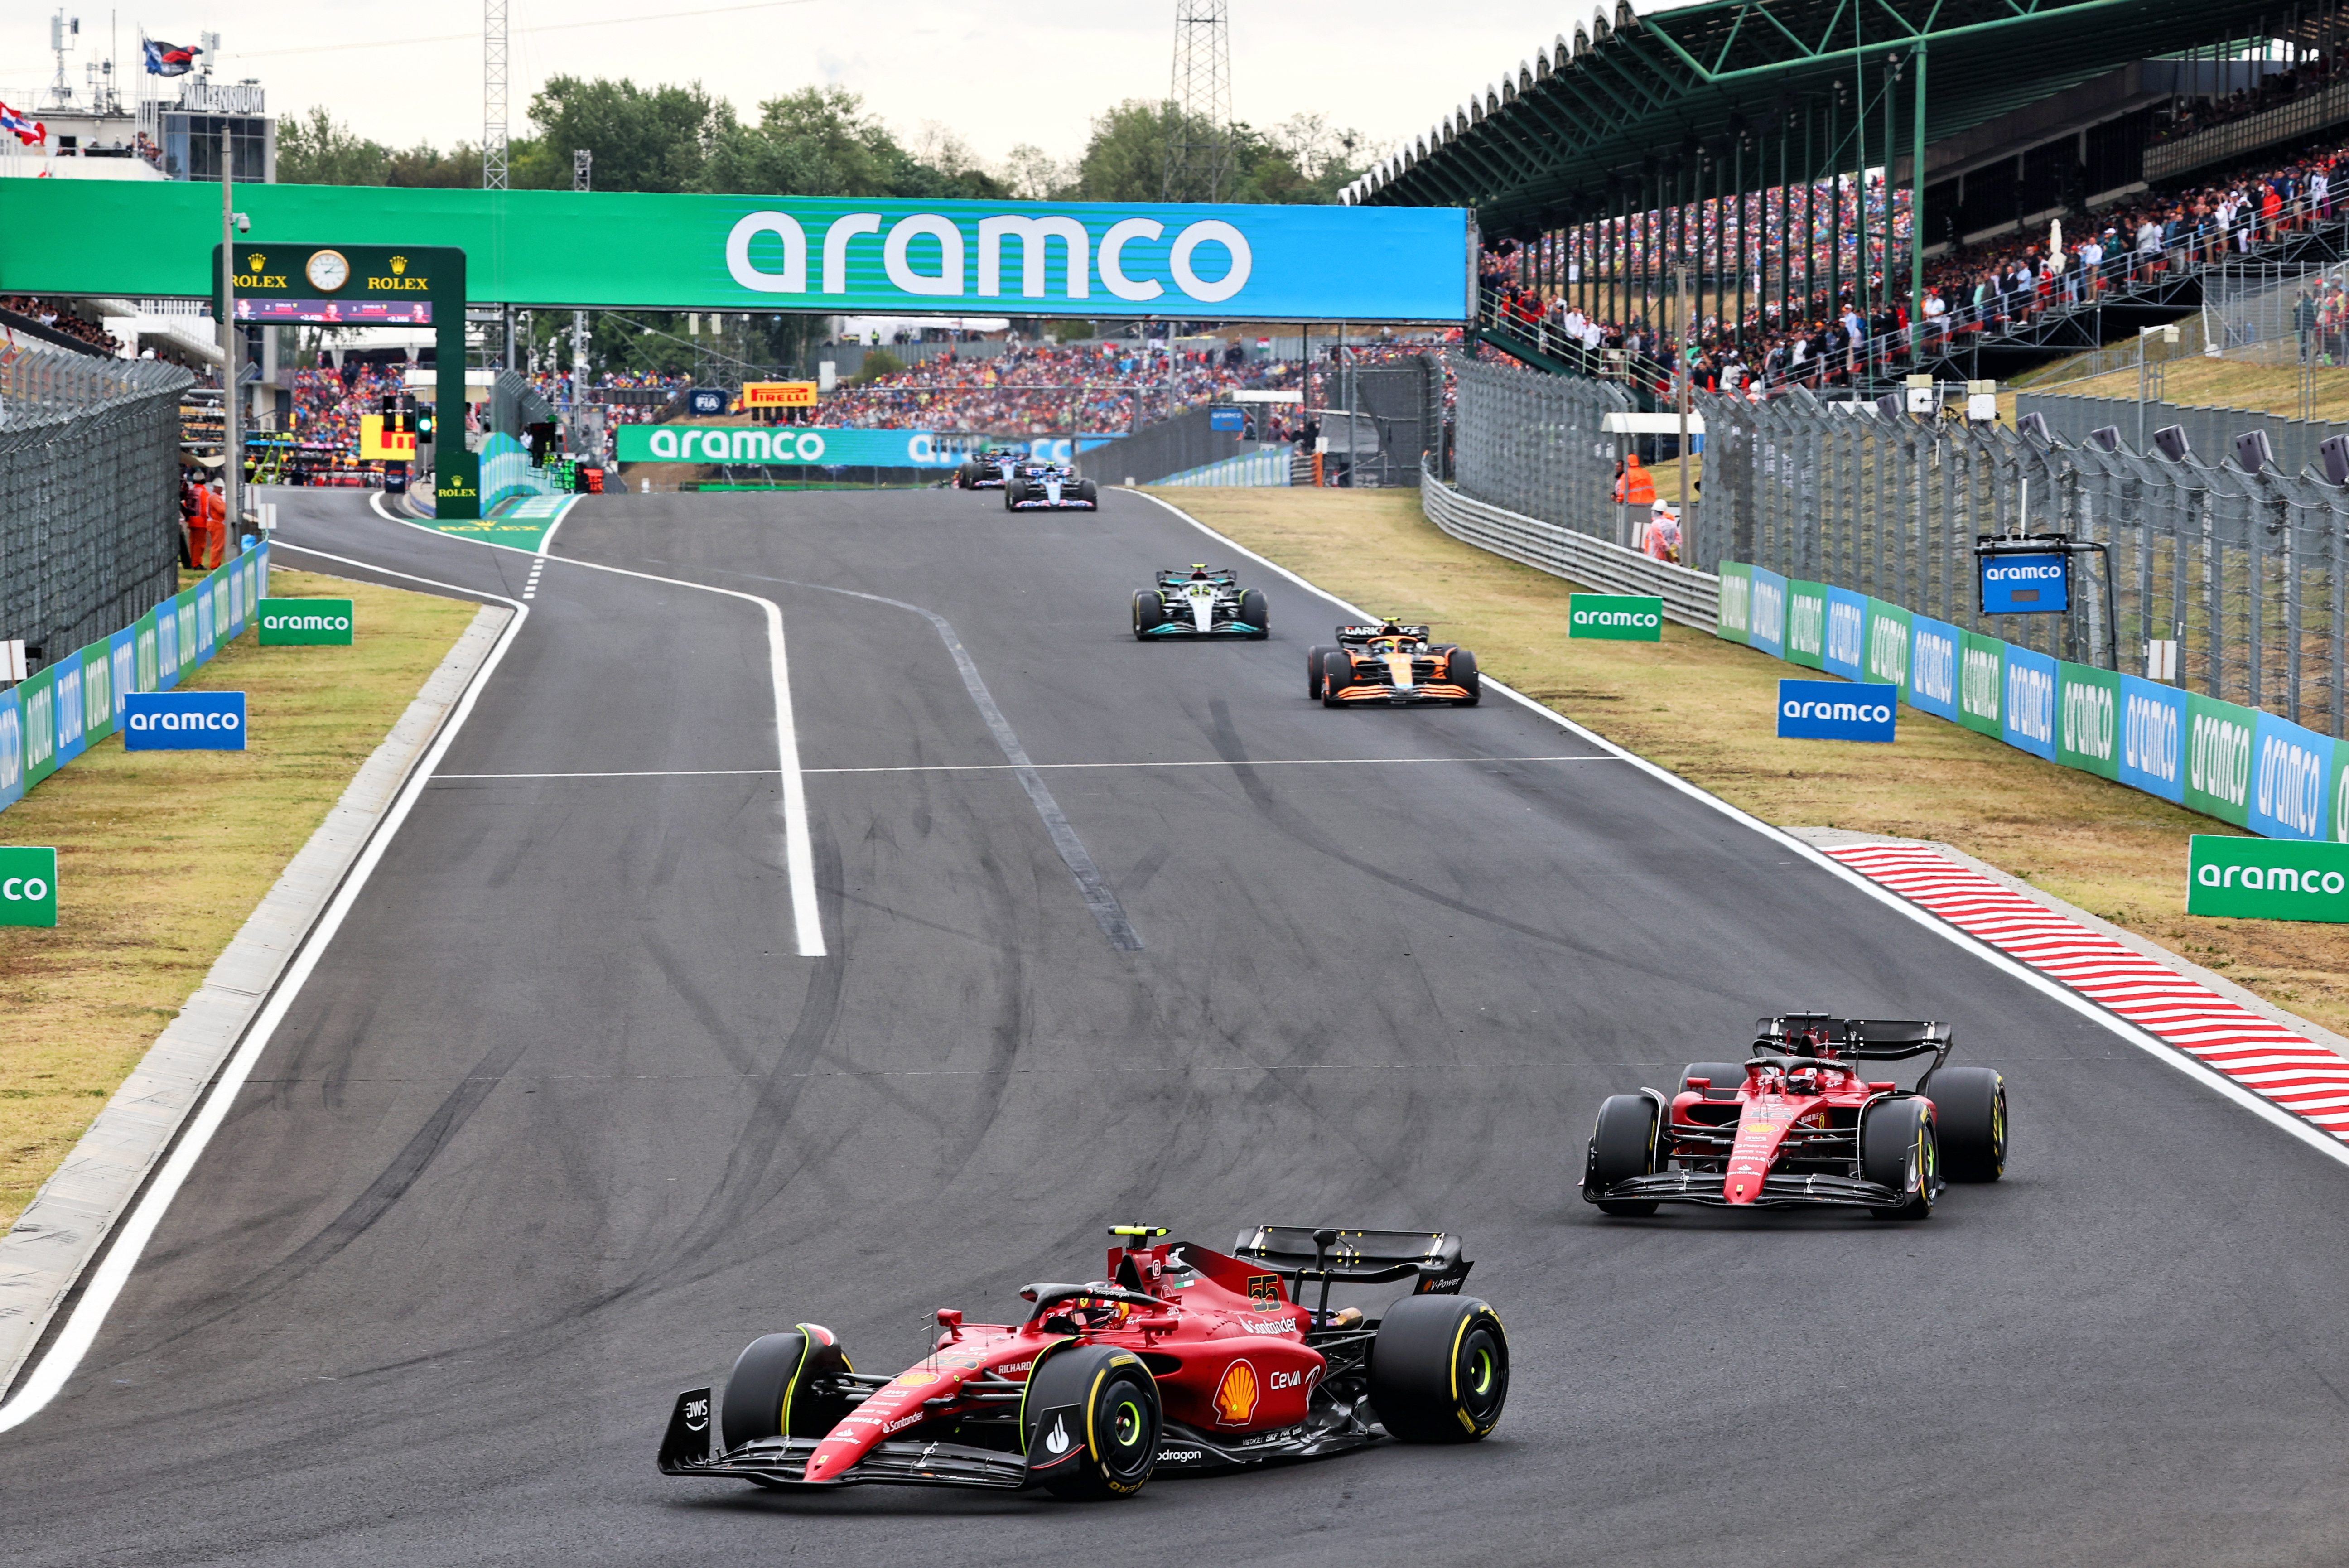 Was Hungary Ferraris biggest F1 2022 mess yet? Our verdict